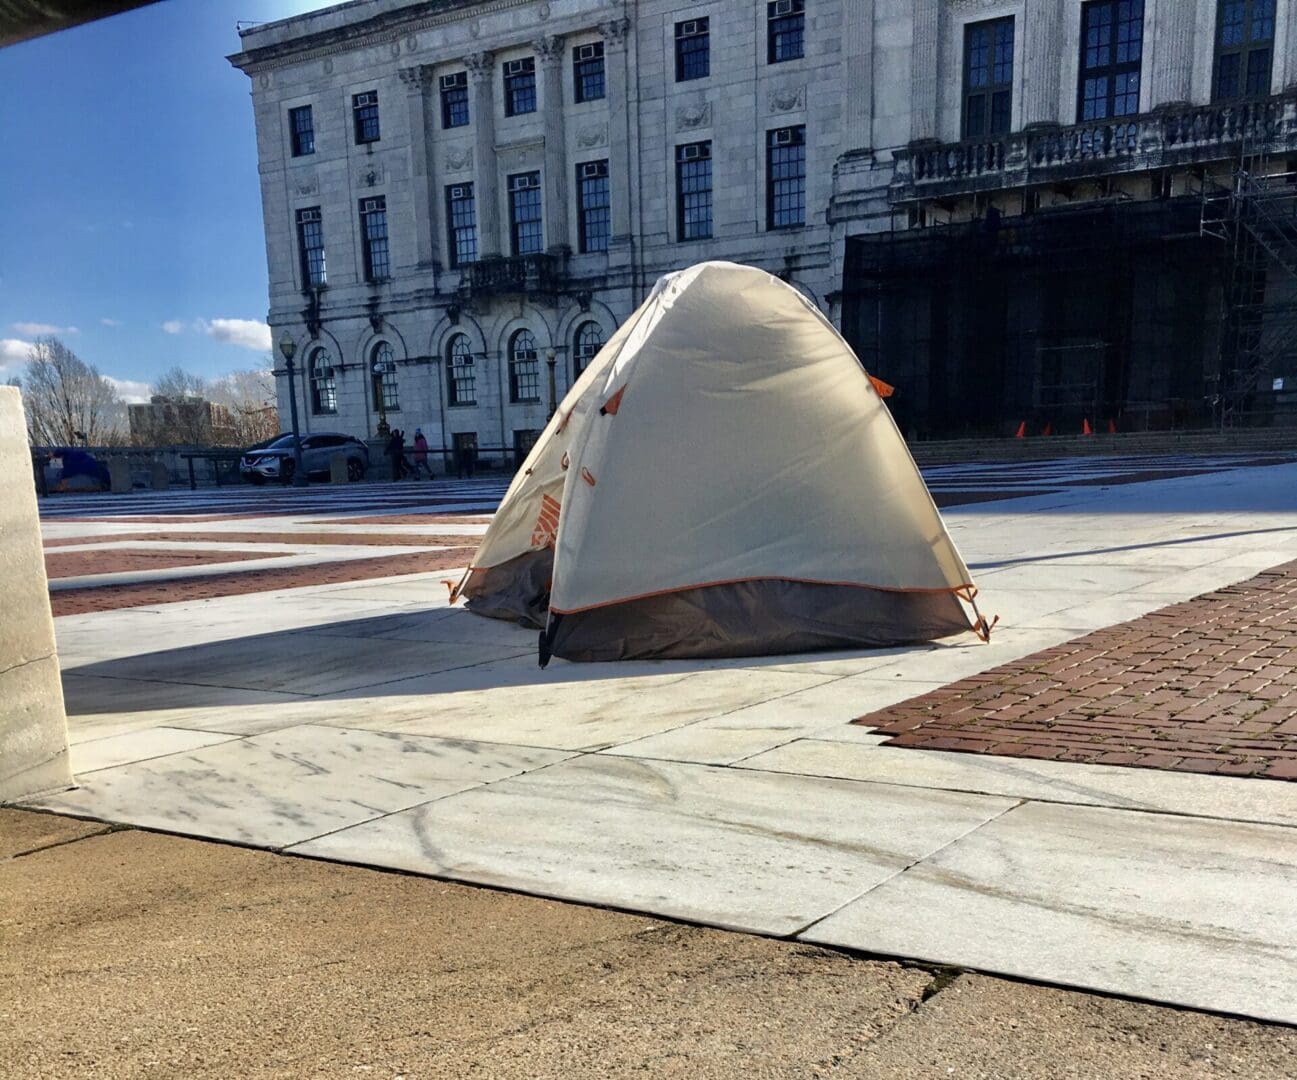 A tent is set up in front of a building.